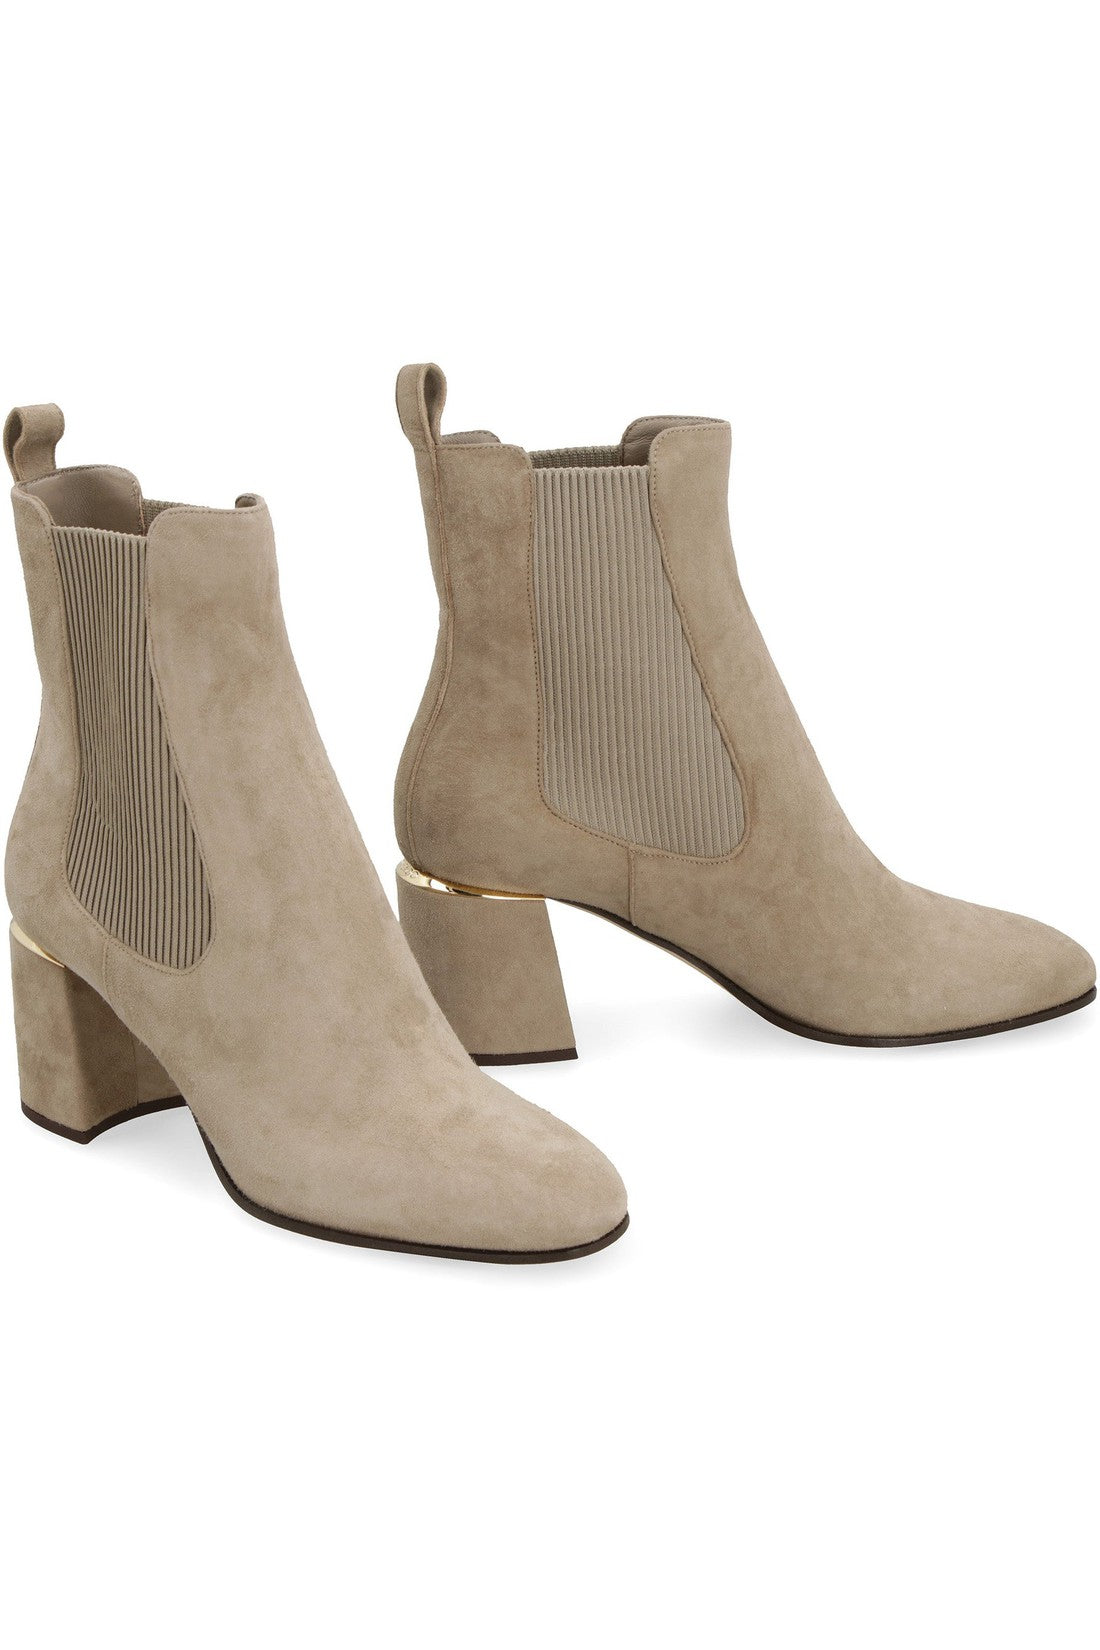 Jimmy Choo-OUTLET-SALE-The Sally 65 Suede Chelsea boots-ARCHIVIST